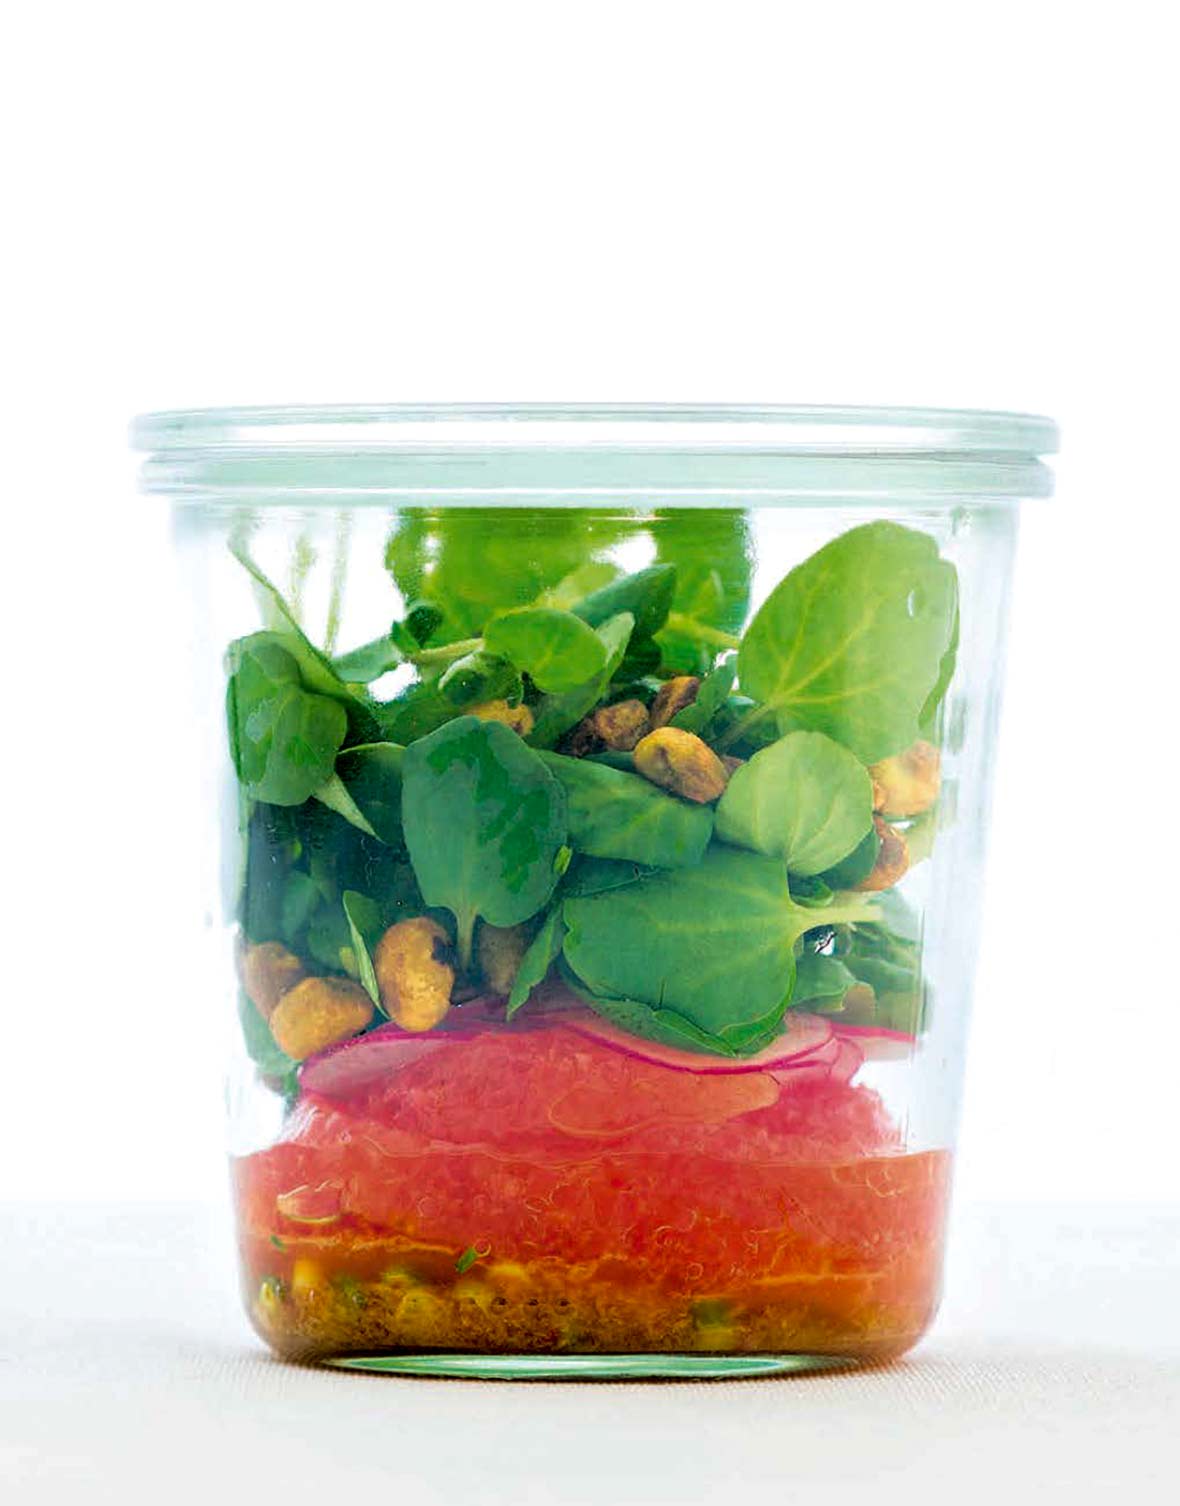 A grapefruit and watercress salad in a glass jar.